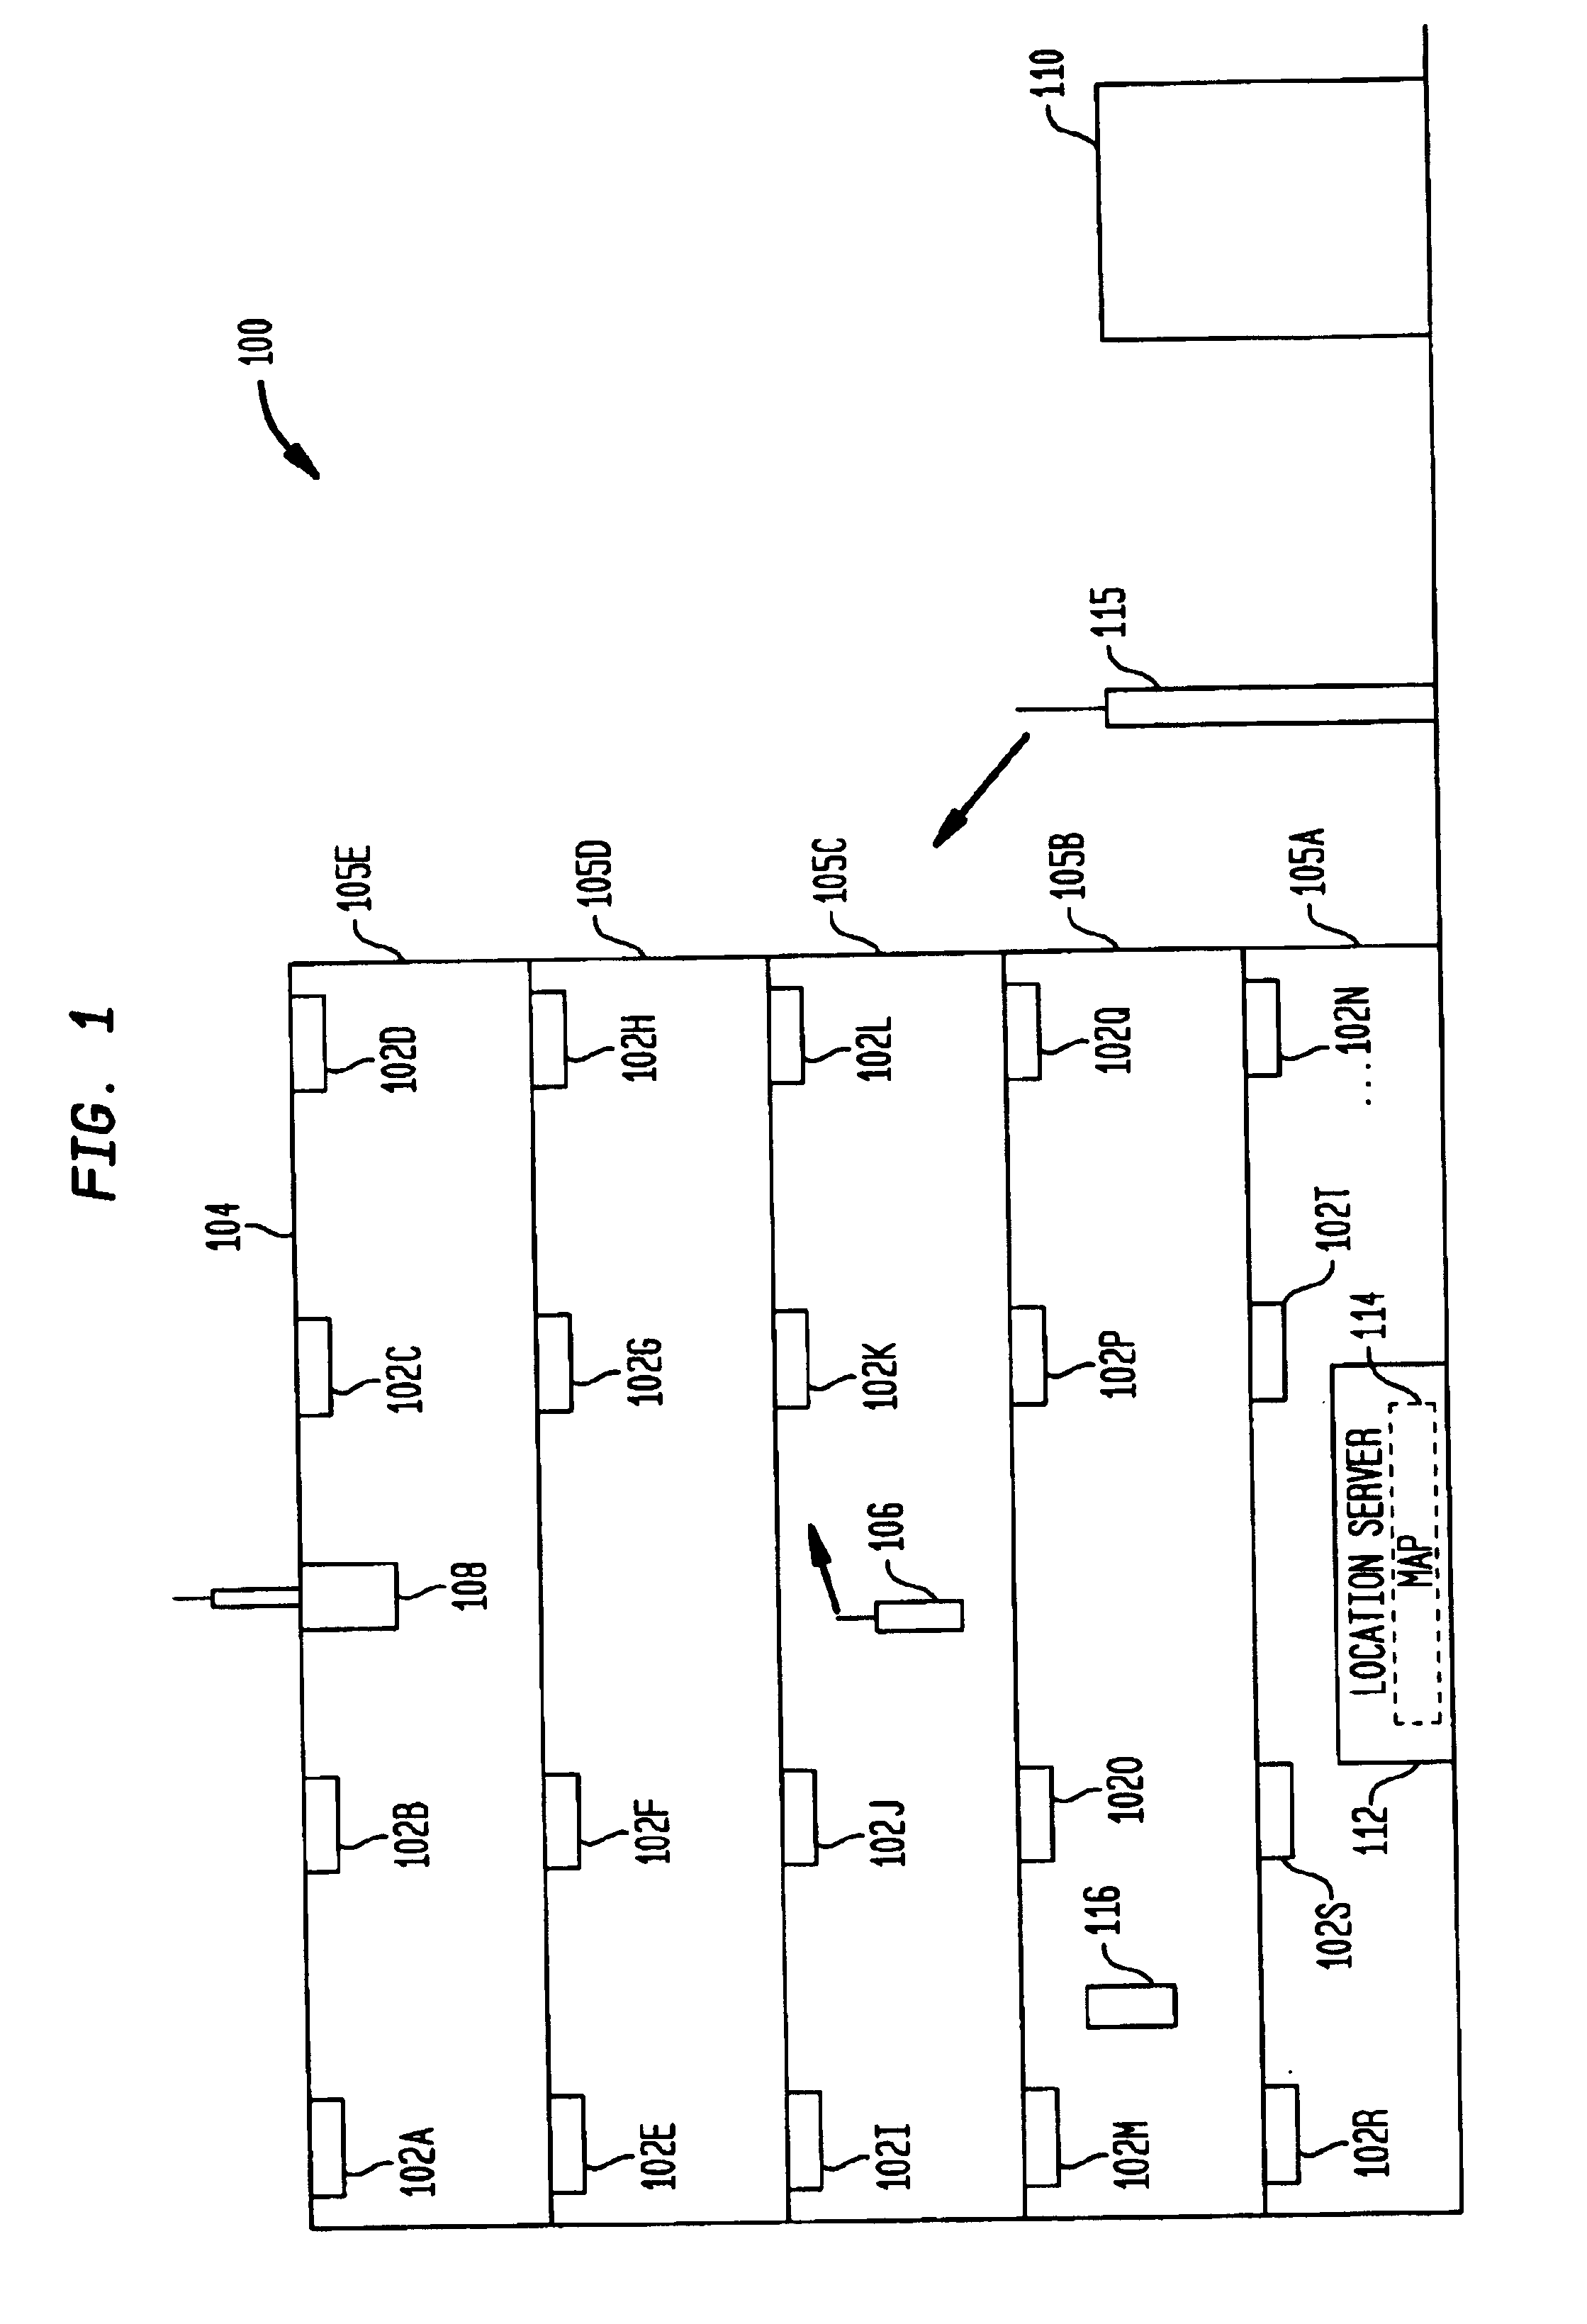 Methods and apparatus for location determination based on dispersed radio frequency tags